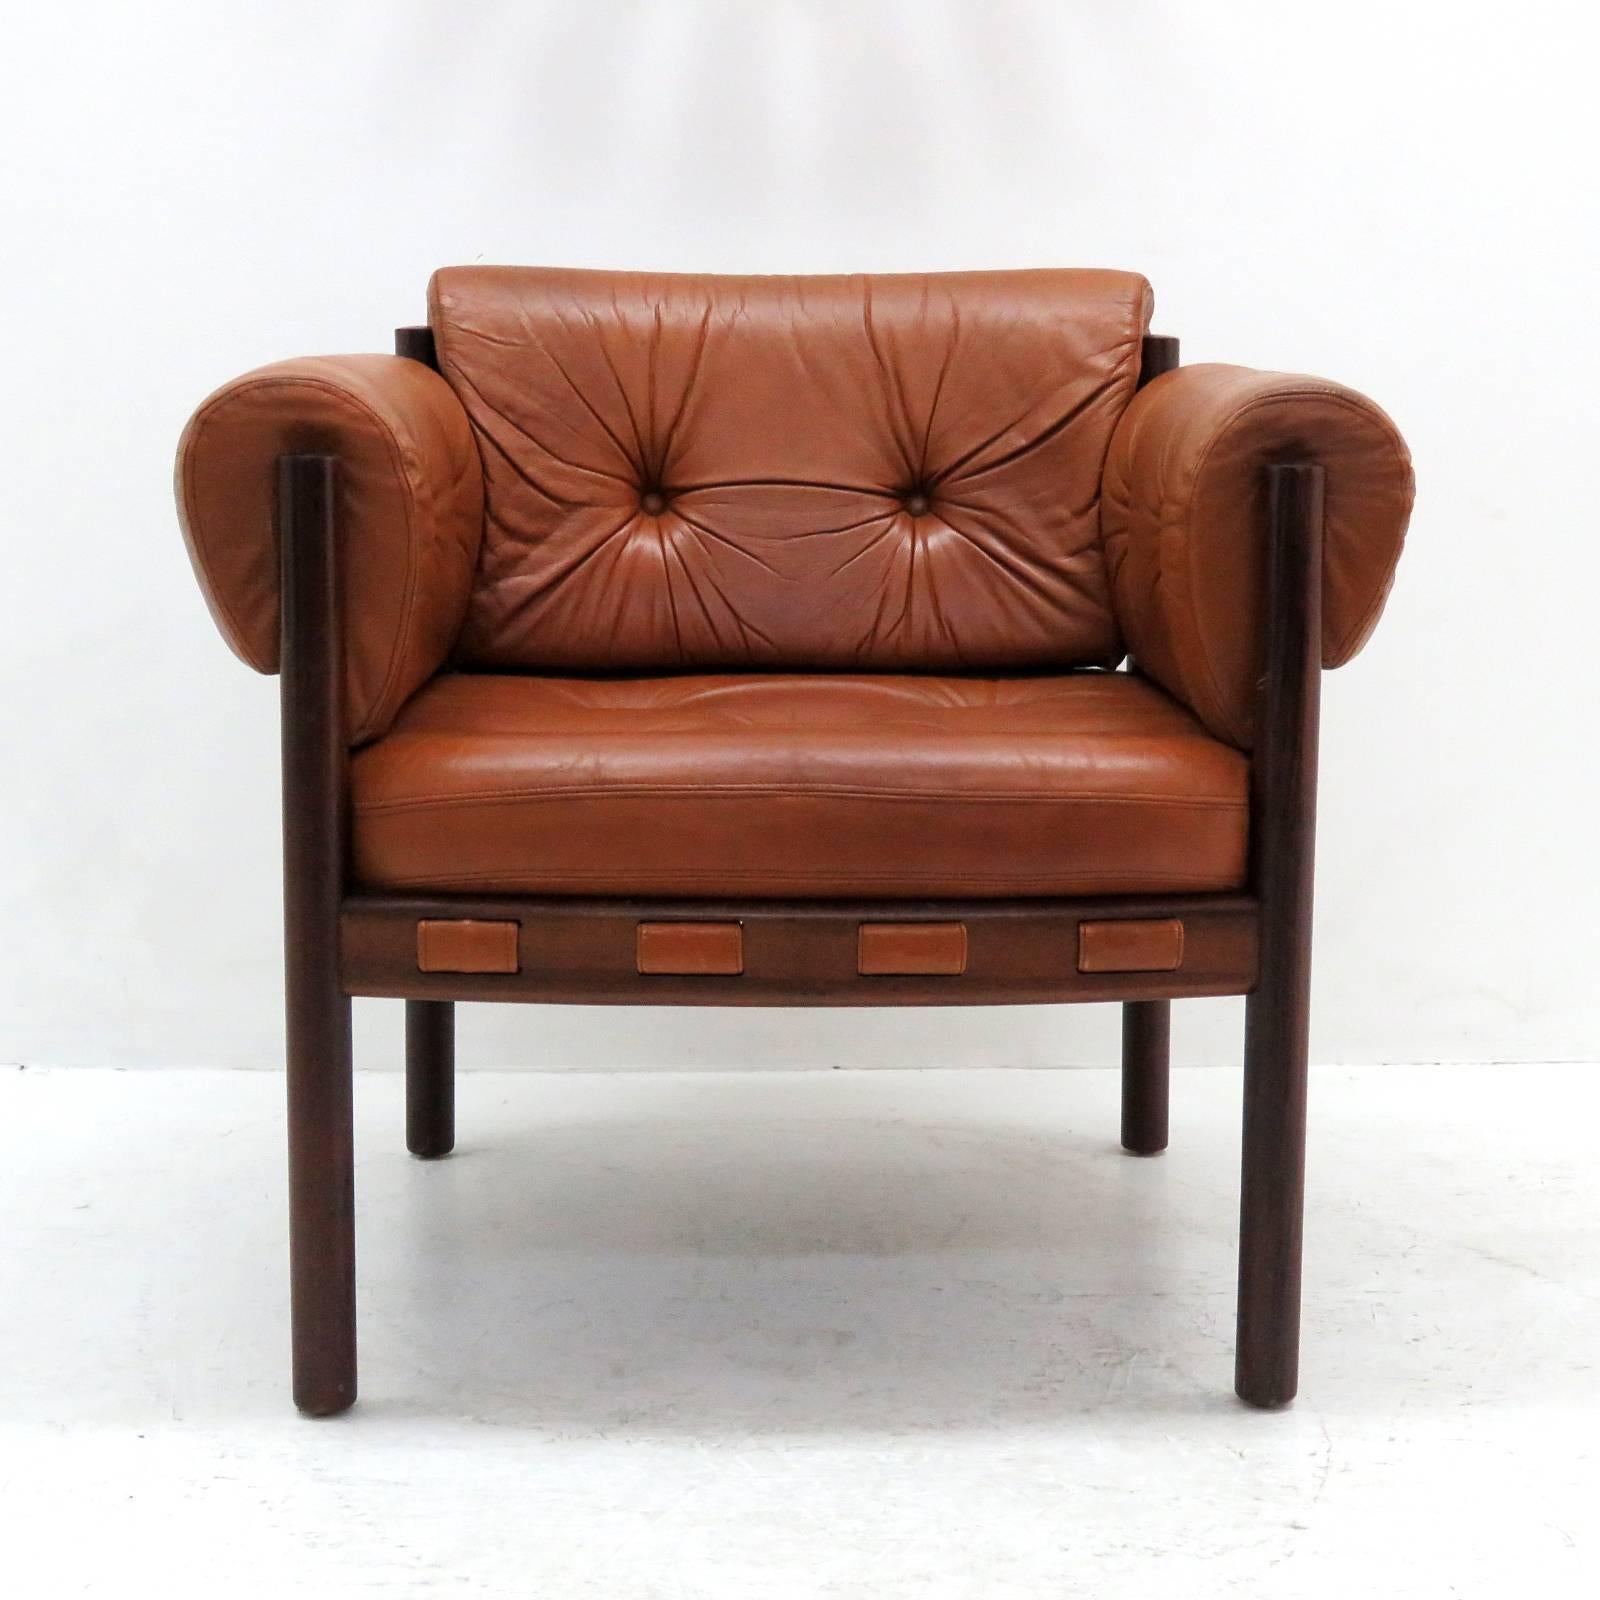 Stunning pair of leather and rosewood armchairs designed in the early 1960s by Arne Norell for Coja Culemborg, with thick tufted cognac colored leather on a sturdy, solid rosewood frame. The chairs are as comfortable as they look.